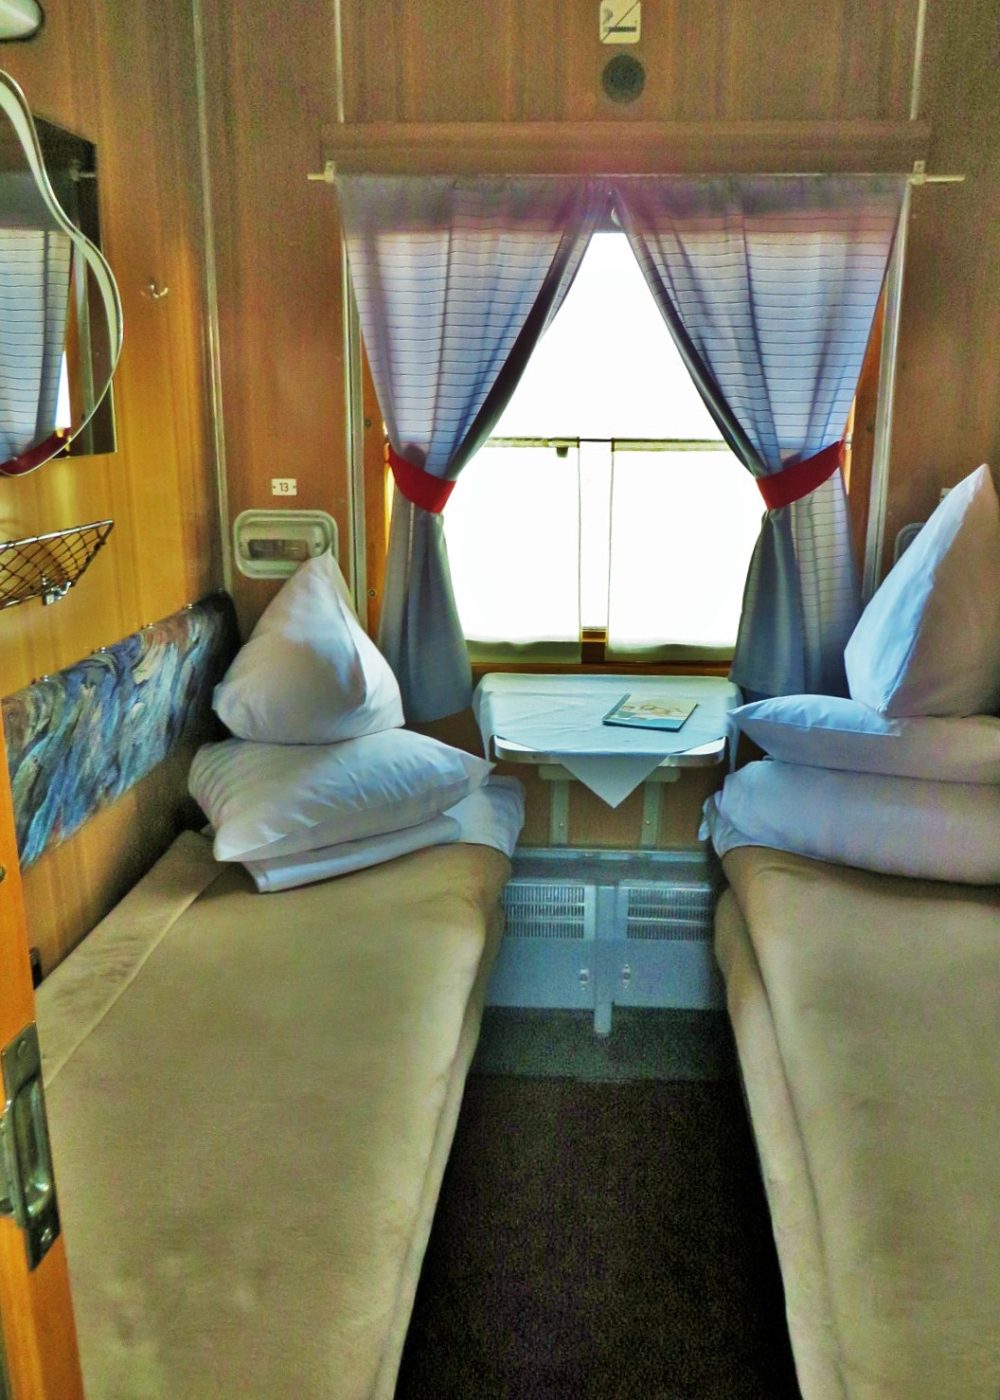 The First Class coach of the Trans-Siberian Railway